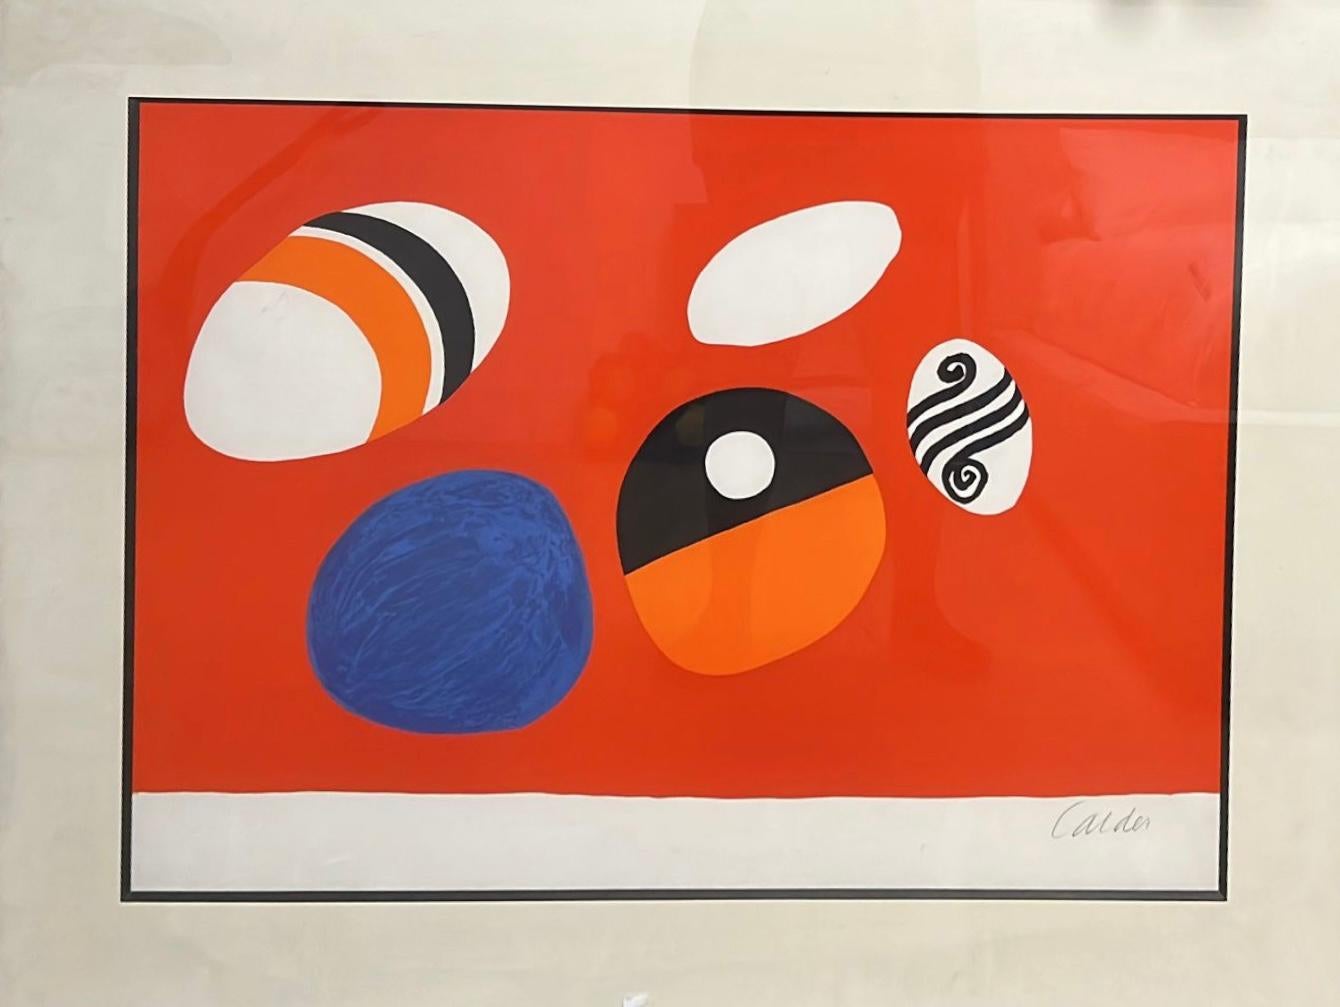 Lithograph in colors

Published by Maeght Éditeur, Paris

Printed by Arte Adrien Maeght, Paris

22 x 29.5 inches

Edition of 75 on Rives, signed and numbered - This one being a proof copy

Framed

Alexander Calder was born in Philadelphia (United